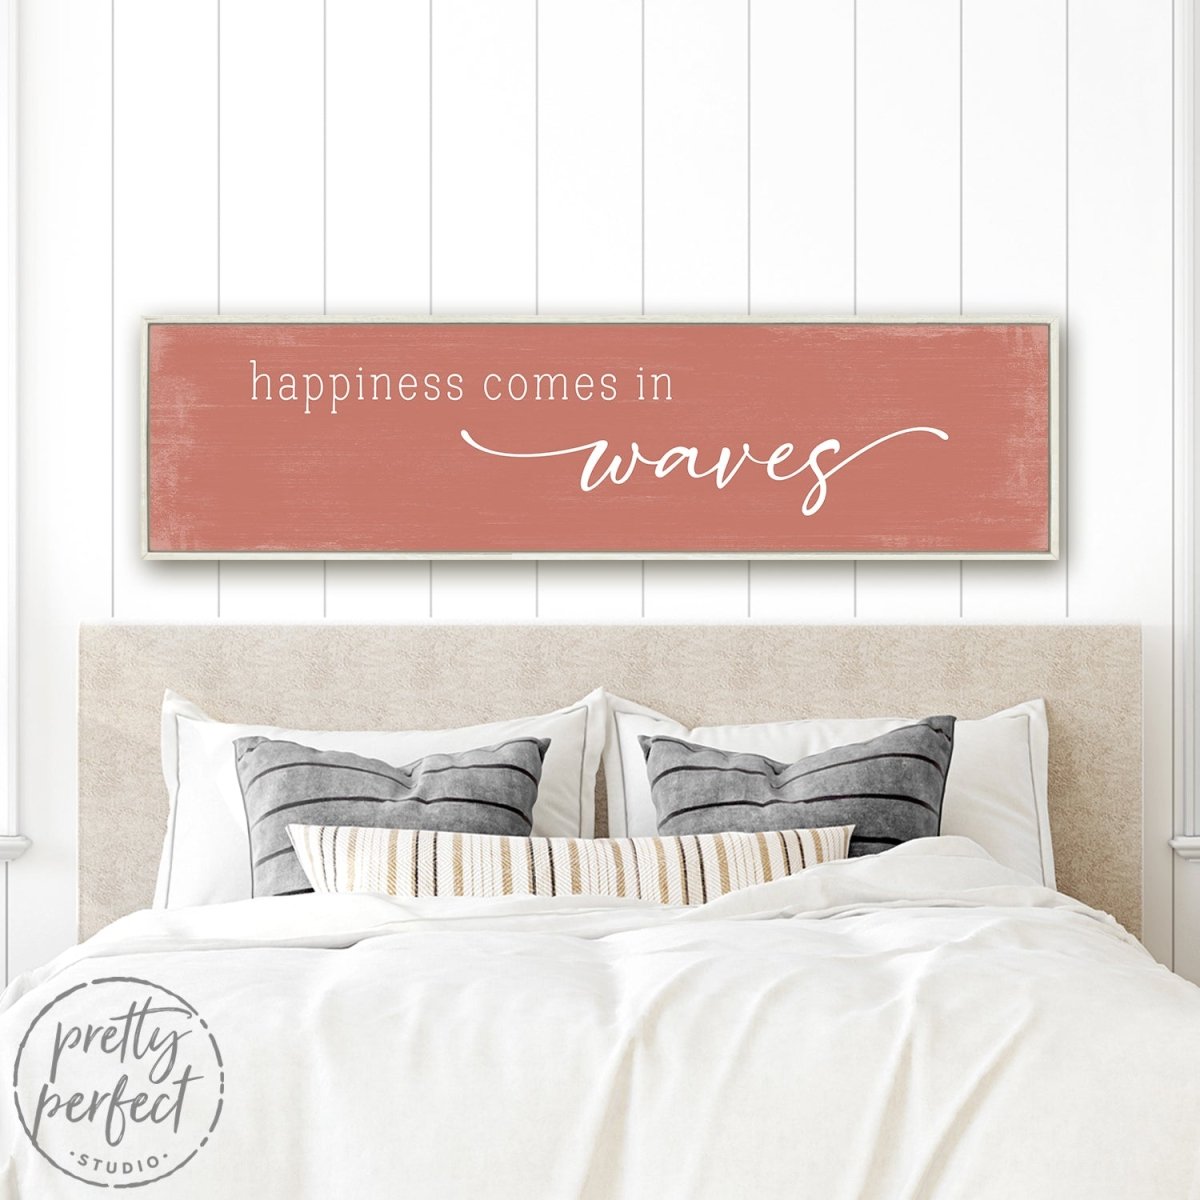 Happiness Comes in Waves Sign Hanging on Wall Above Bed - Pretty Perfect Studio